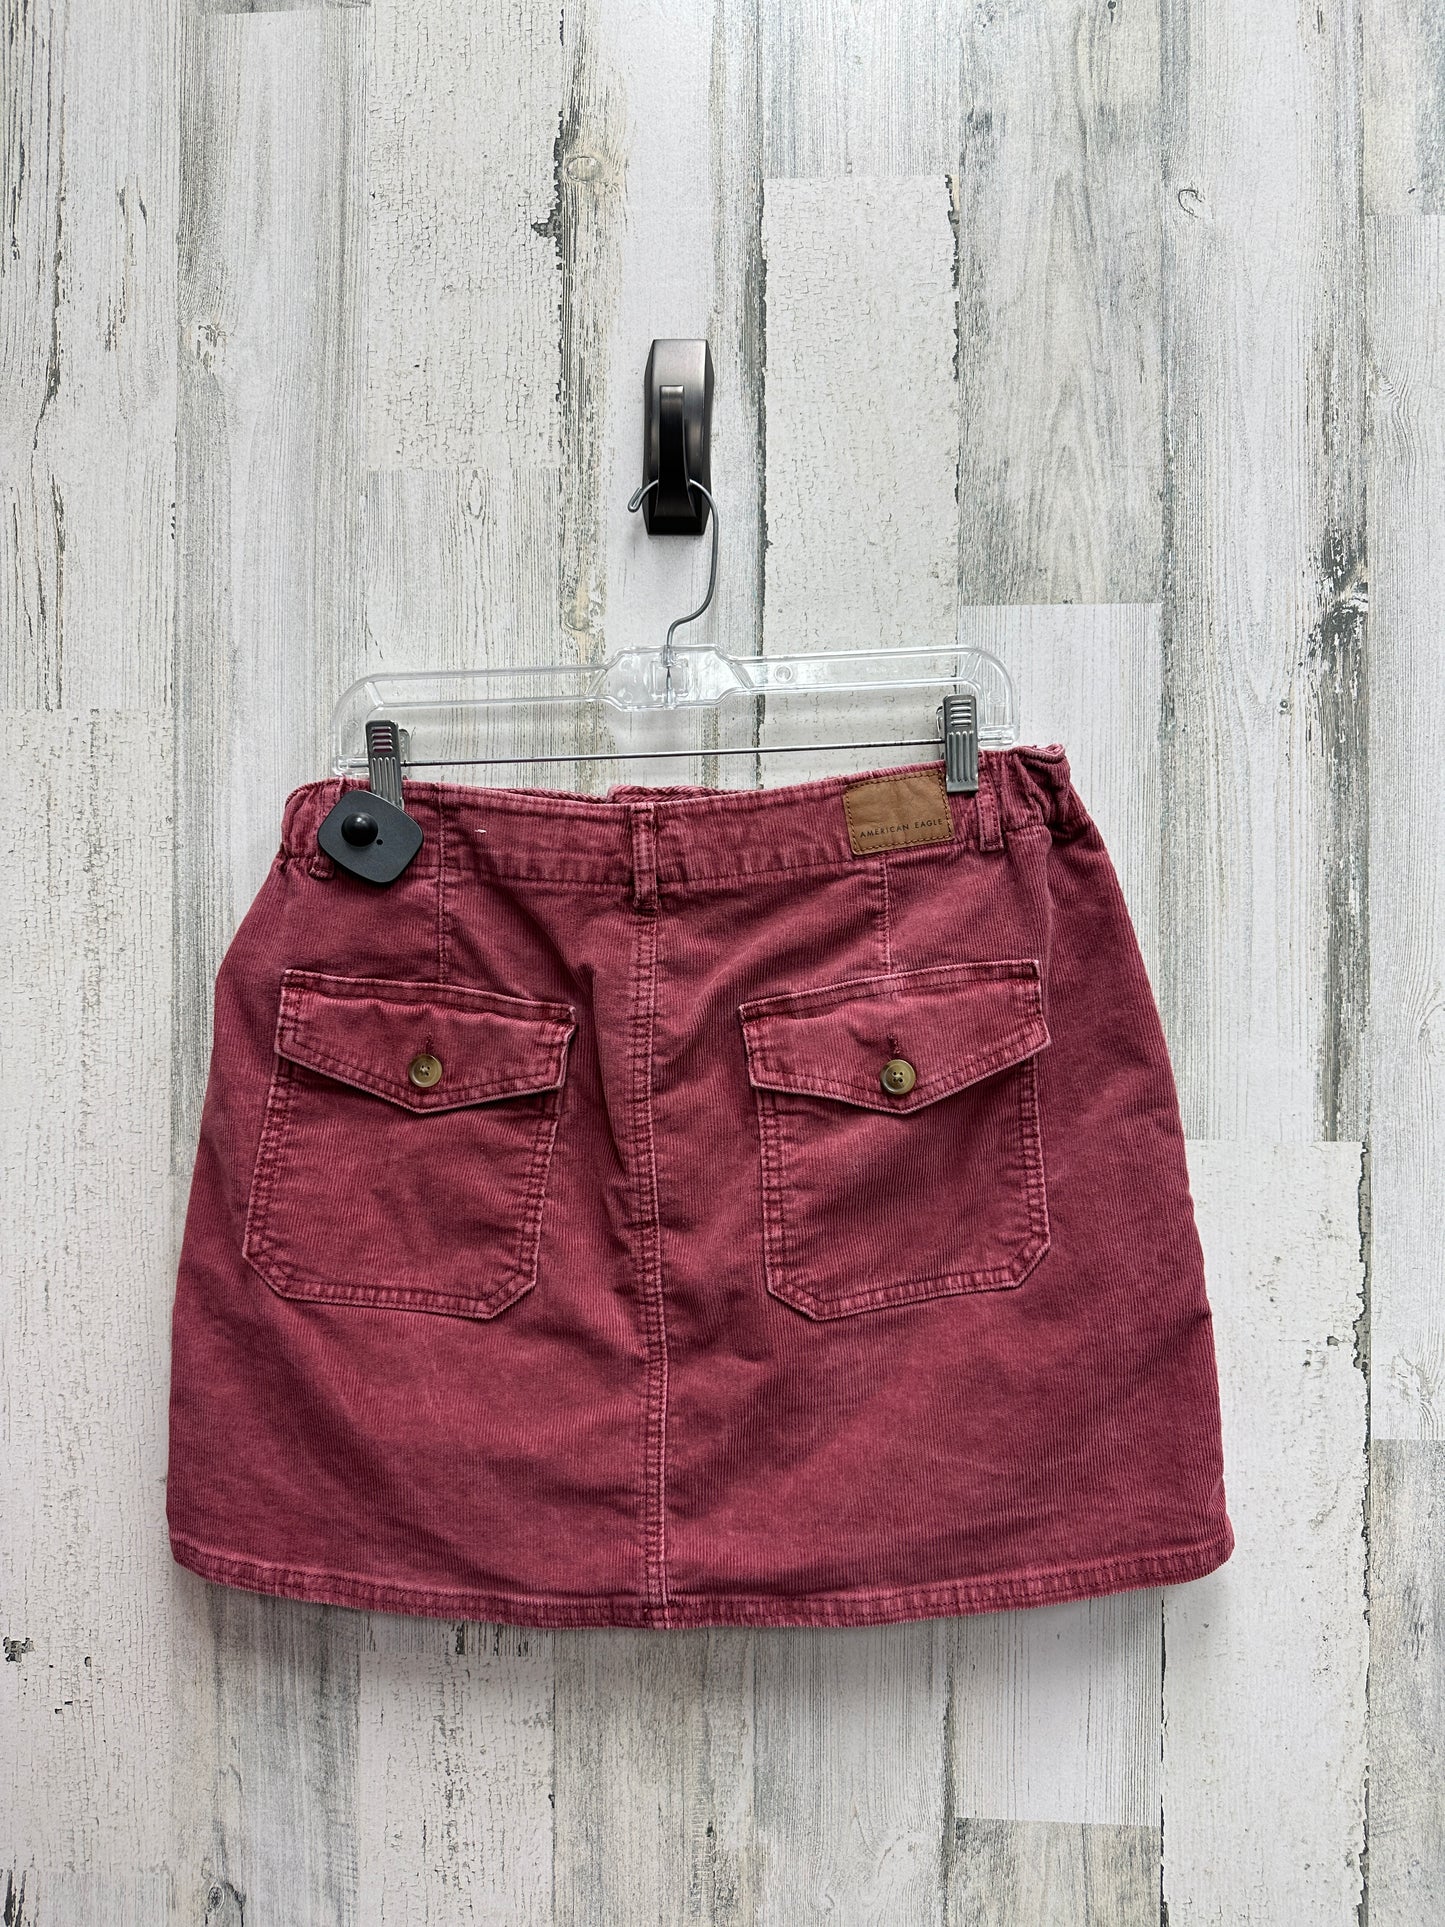 Skirt Mini & Short By American Eagle  Size: 12